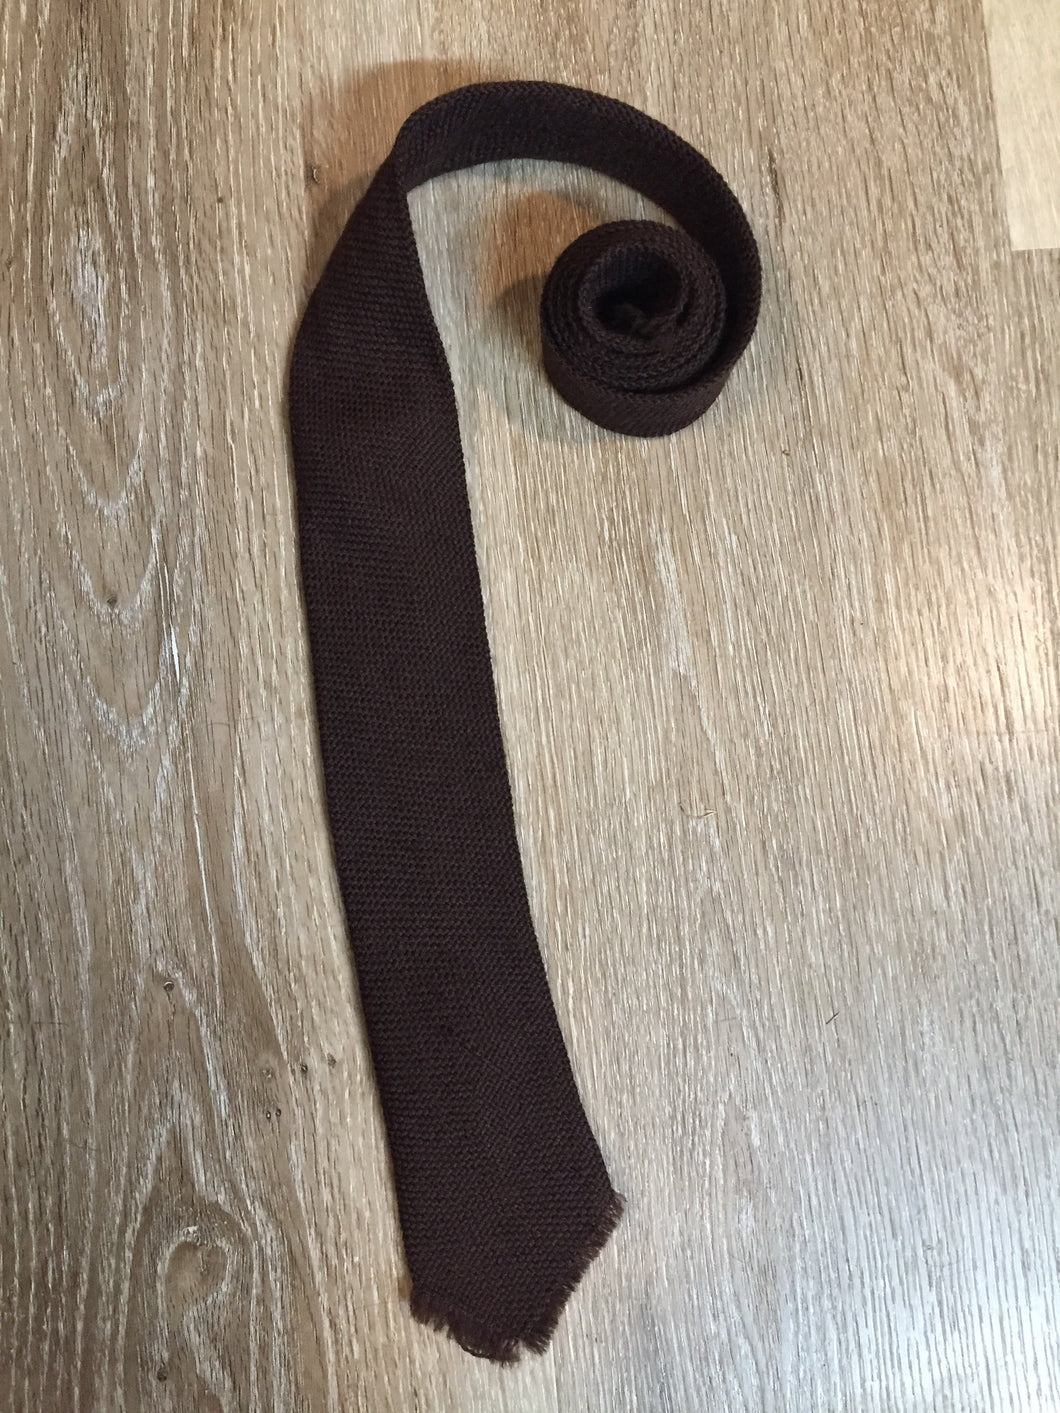 Kingspier Vintage - Dark brown wool tie, maybe from the 30’s or 40’s. Fringe edge.

Length: 49”
Width: 2.5” 

This tie is in excellent condition.